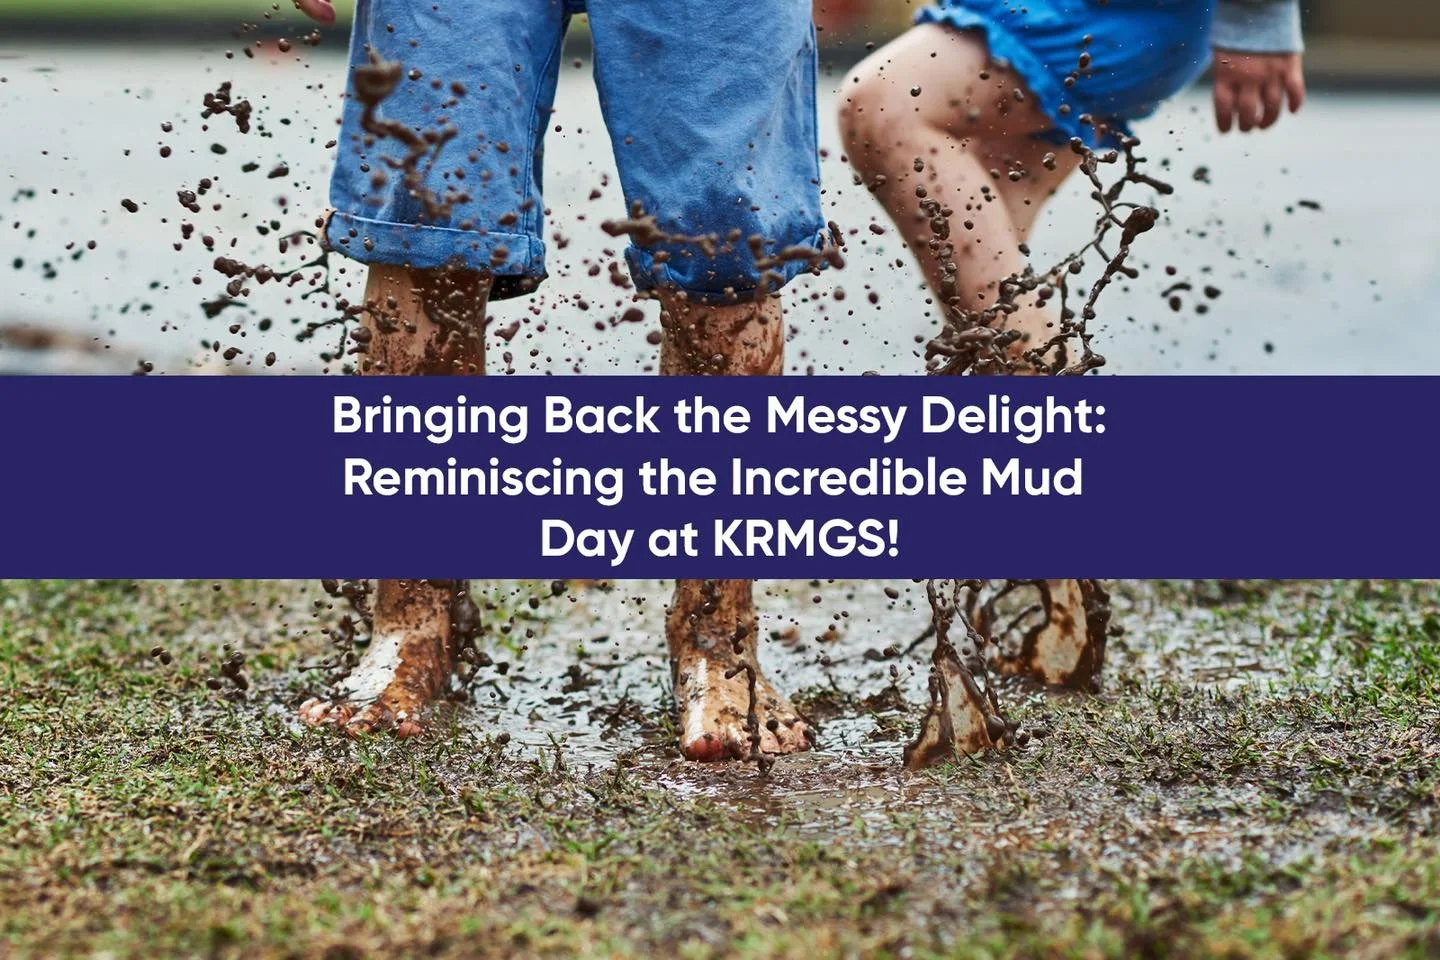 A Glimpse of Mud Day